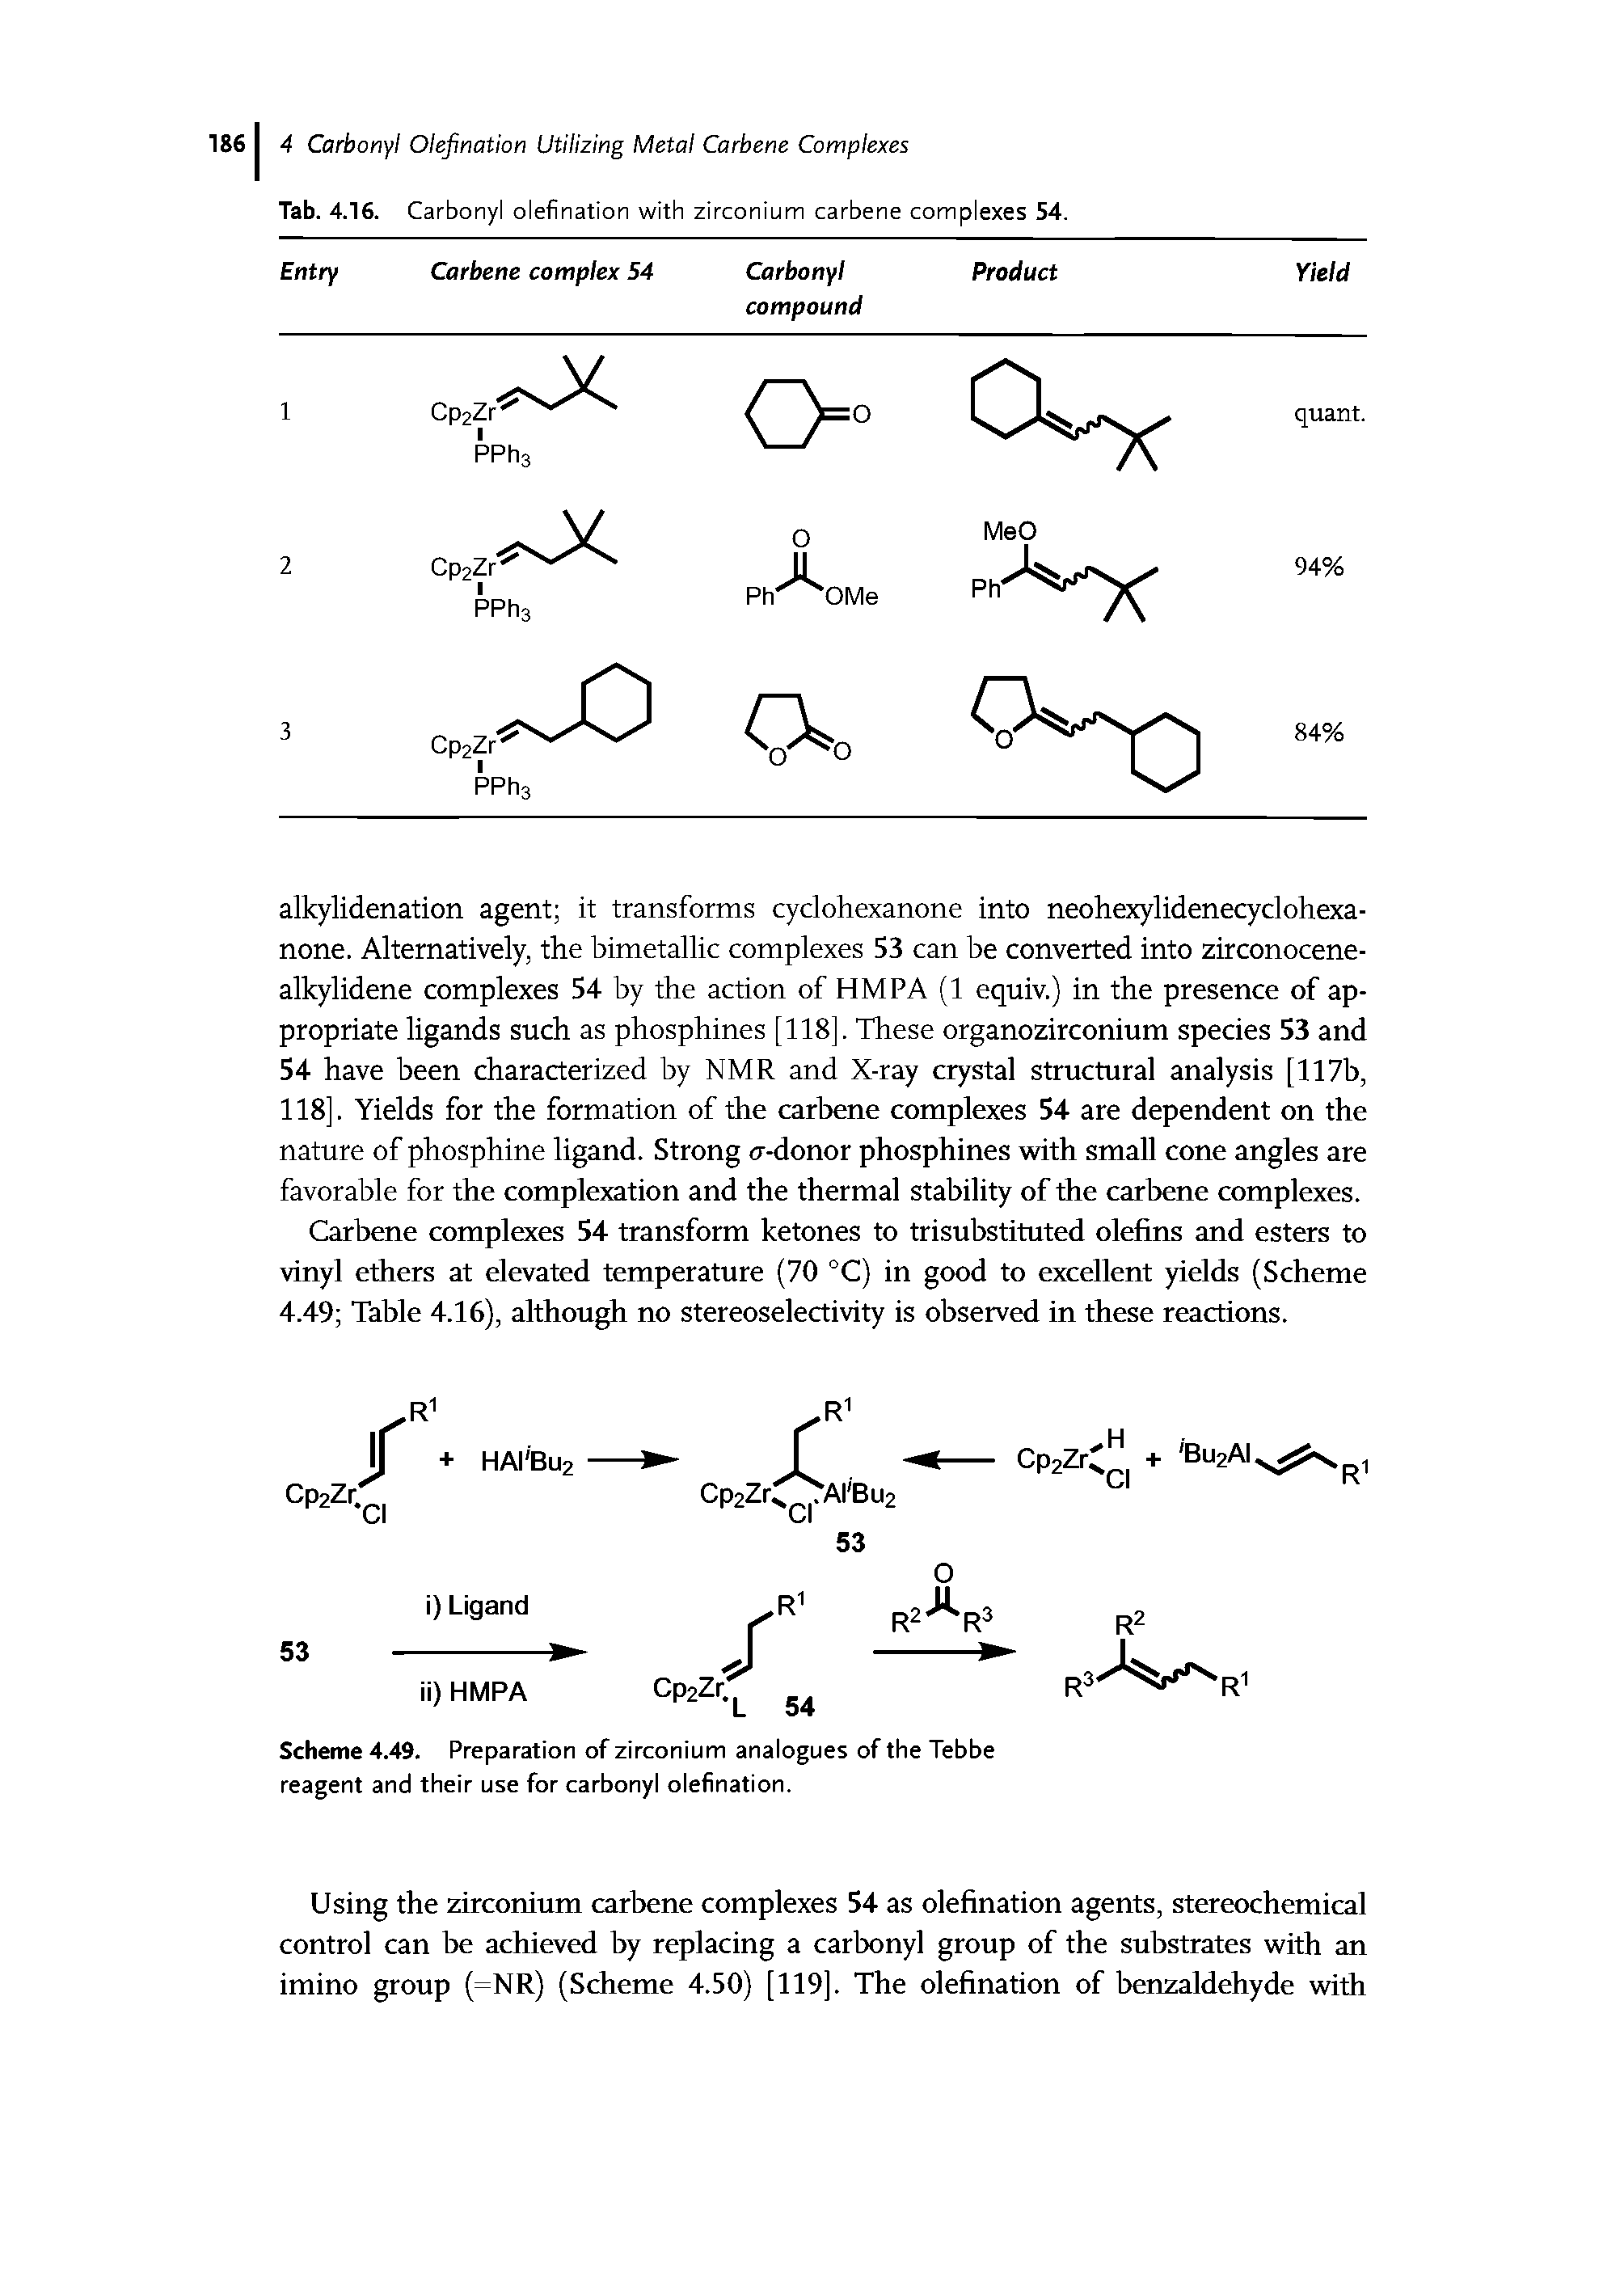 Scheme 4.49. Preparation of zirconium analogues of the Tebbe reagent and their use for carbonyl olefination.